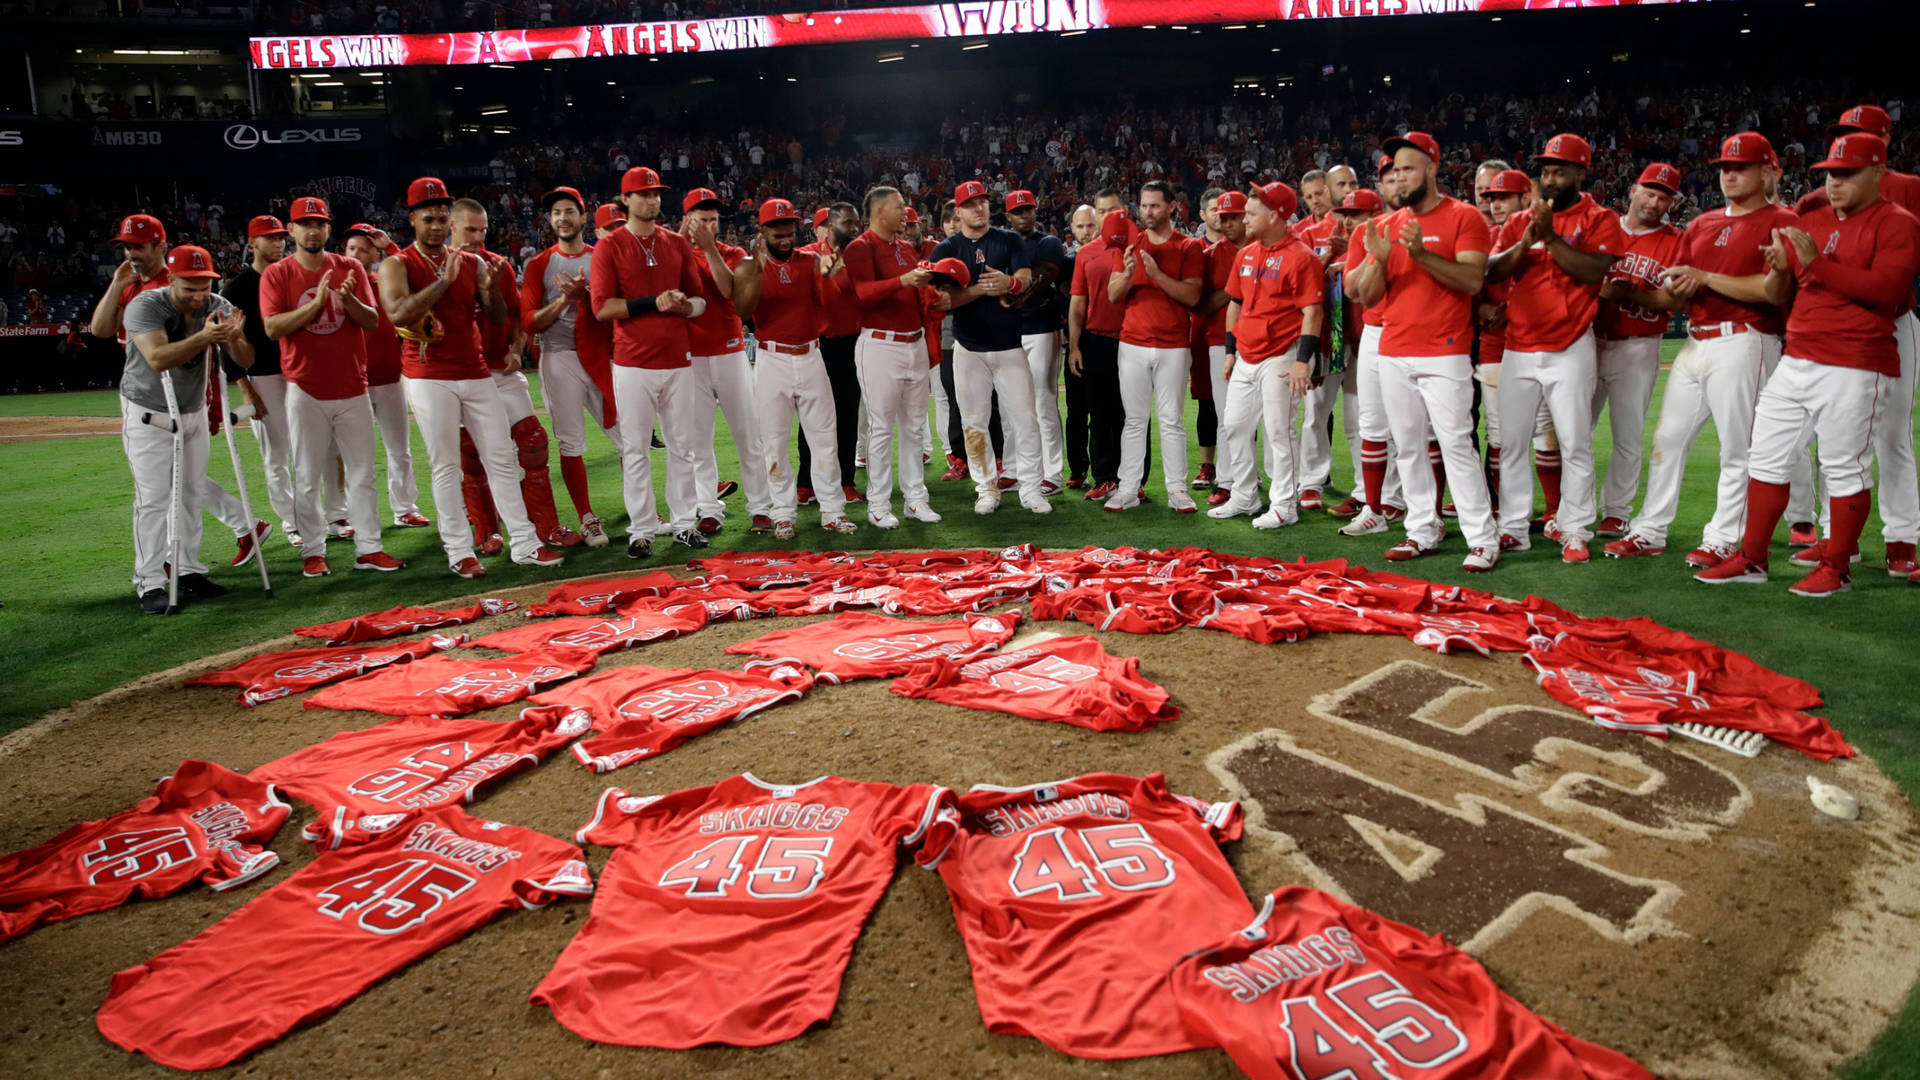 Los Angeles Angels Skaggs Jerseys With Players